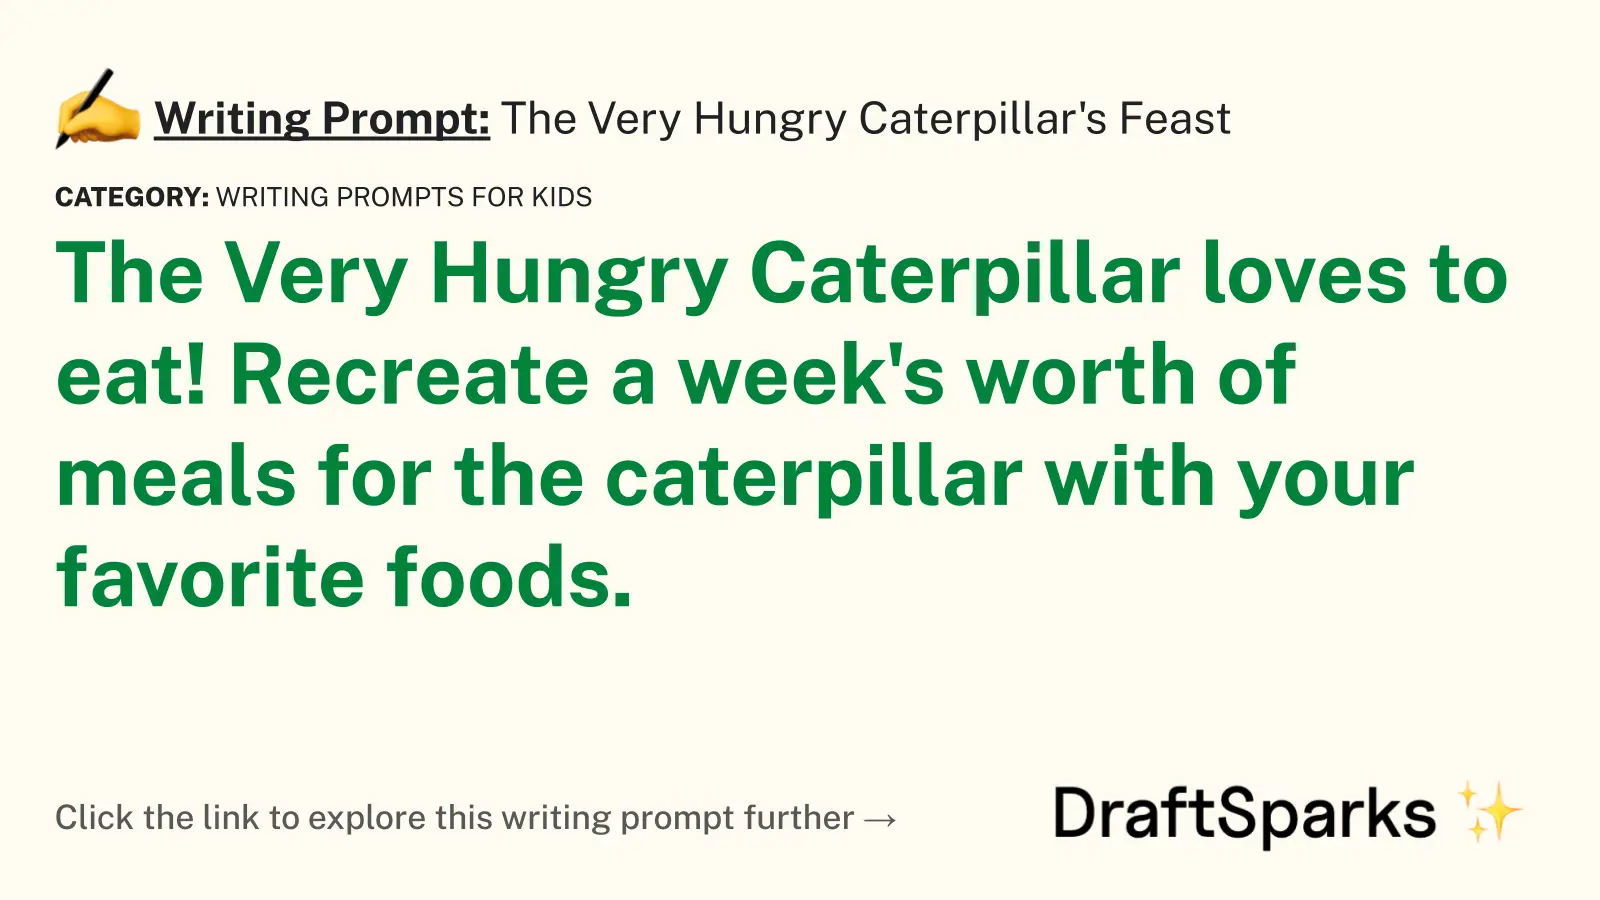 The Very Hungry Caterpillar’s Feast